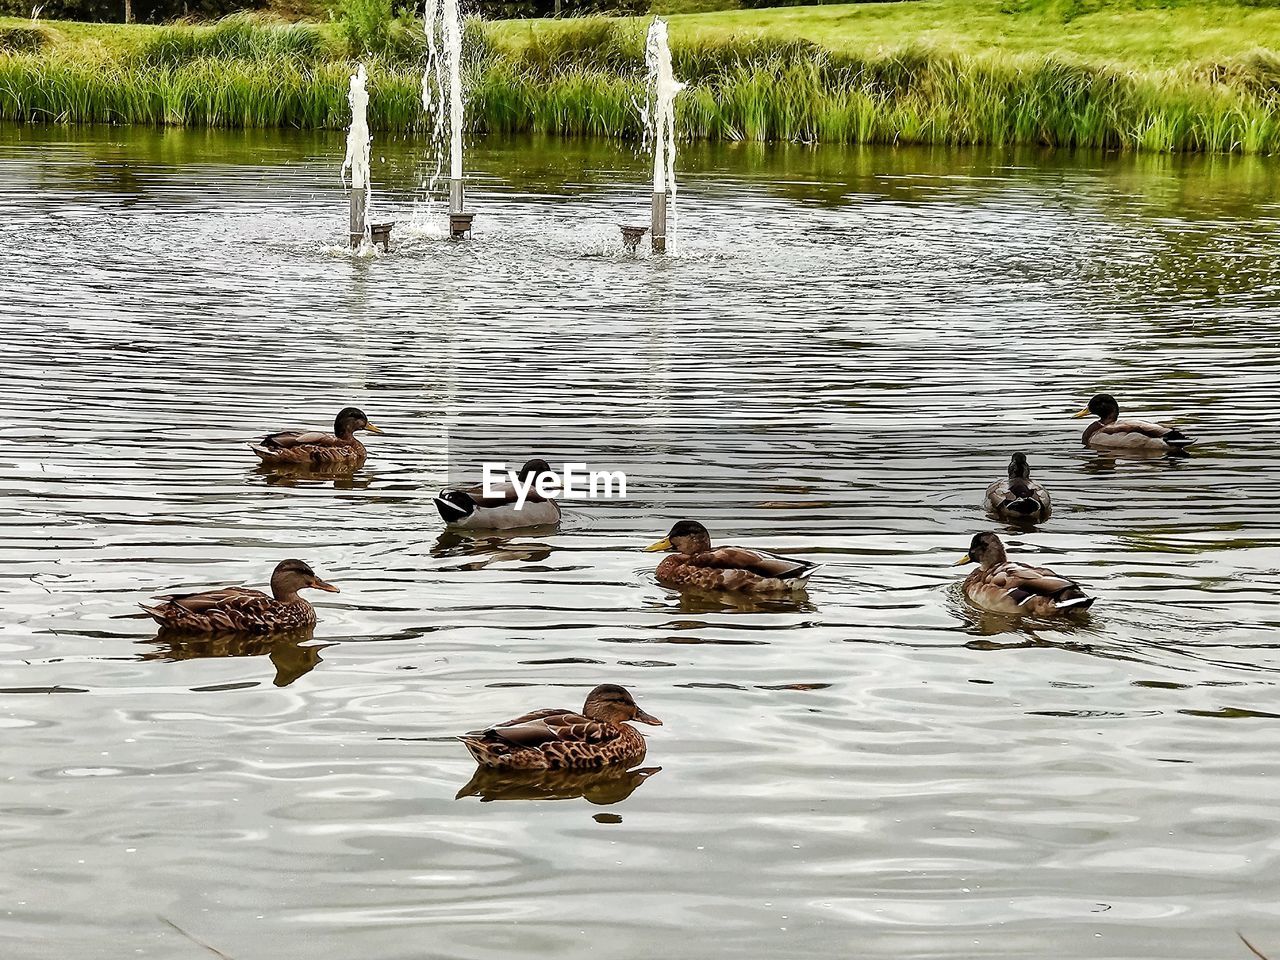 VIEW OF DUCKS IN LAKE